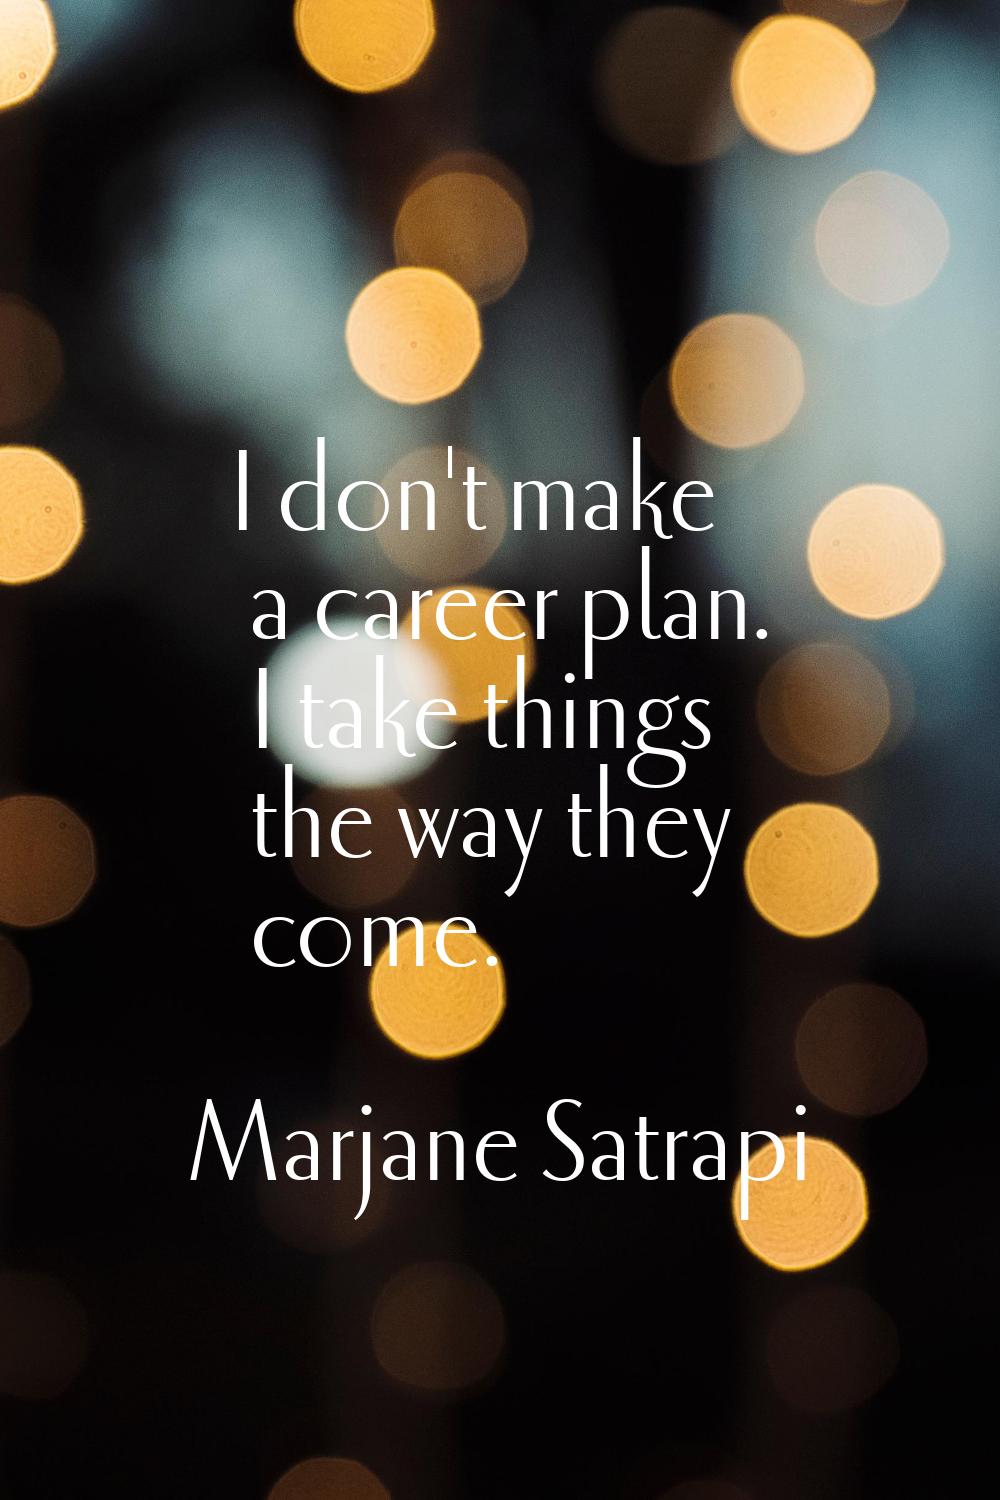 I don't make a career plan. I take things the way they come.